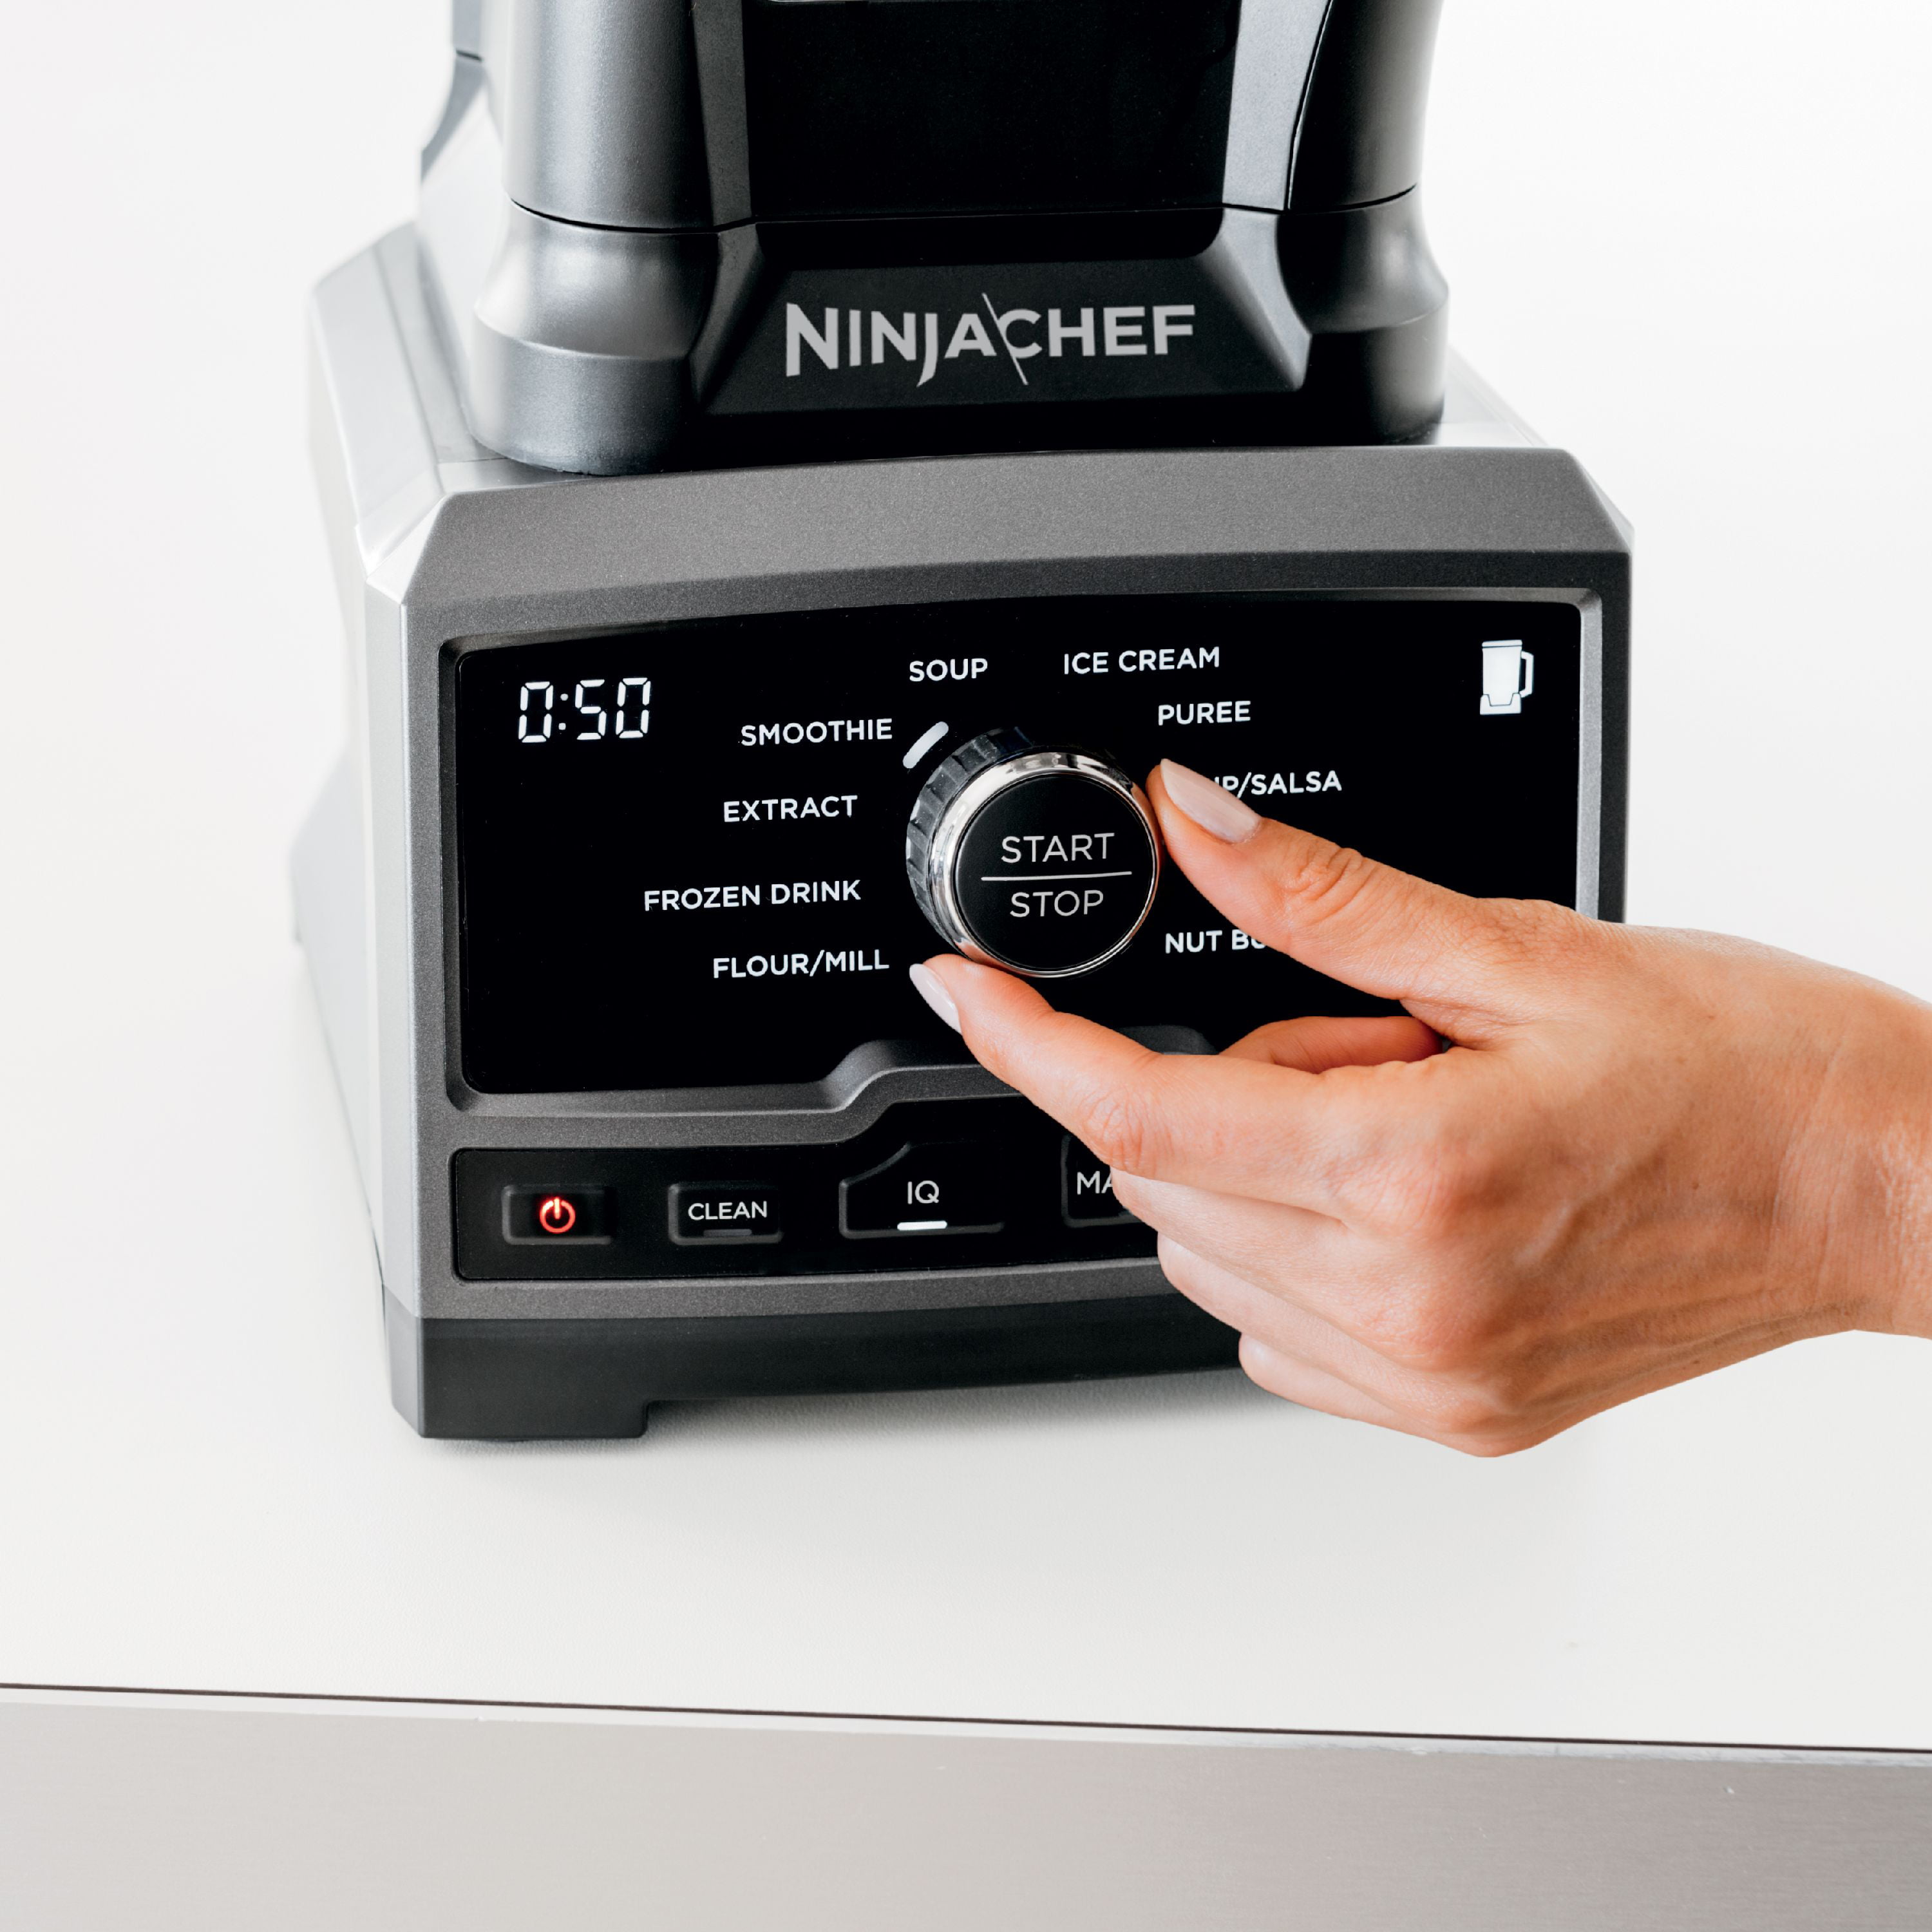 Ninja Chef High Speed Blender REVIEW - MacSources